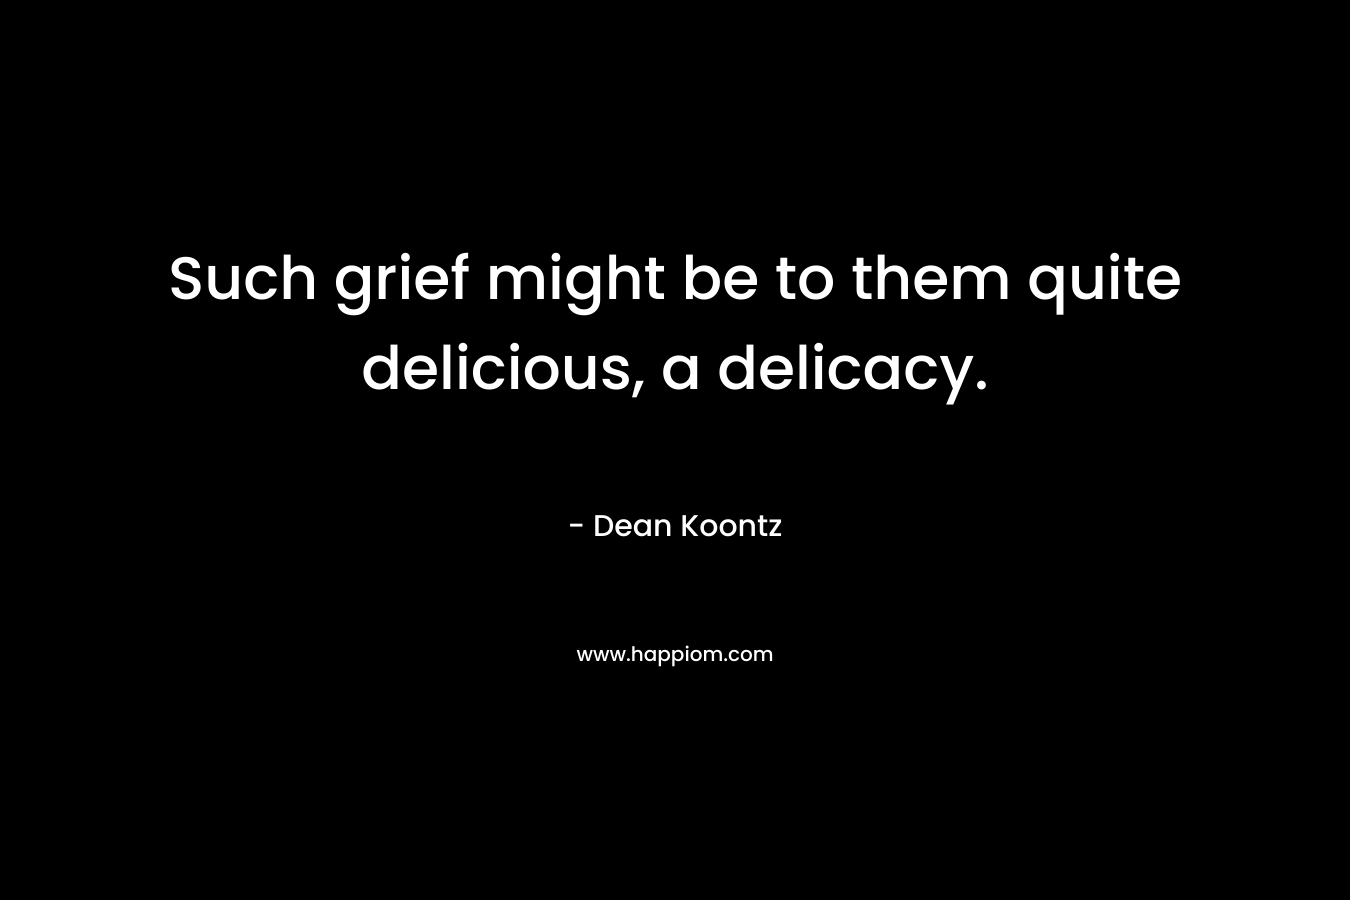 Such grief might be to them quite delicious, a delicacy.